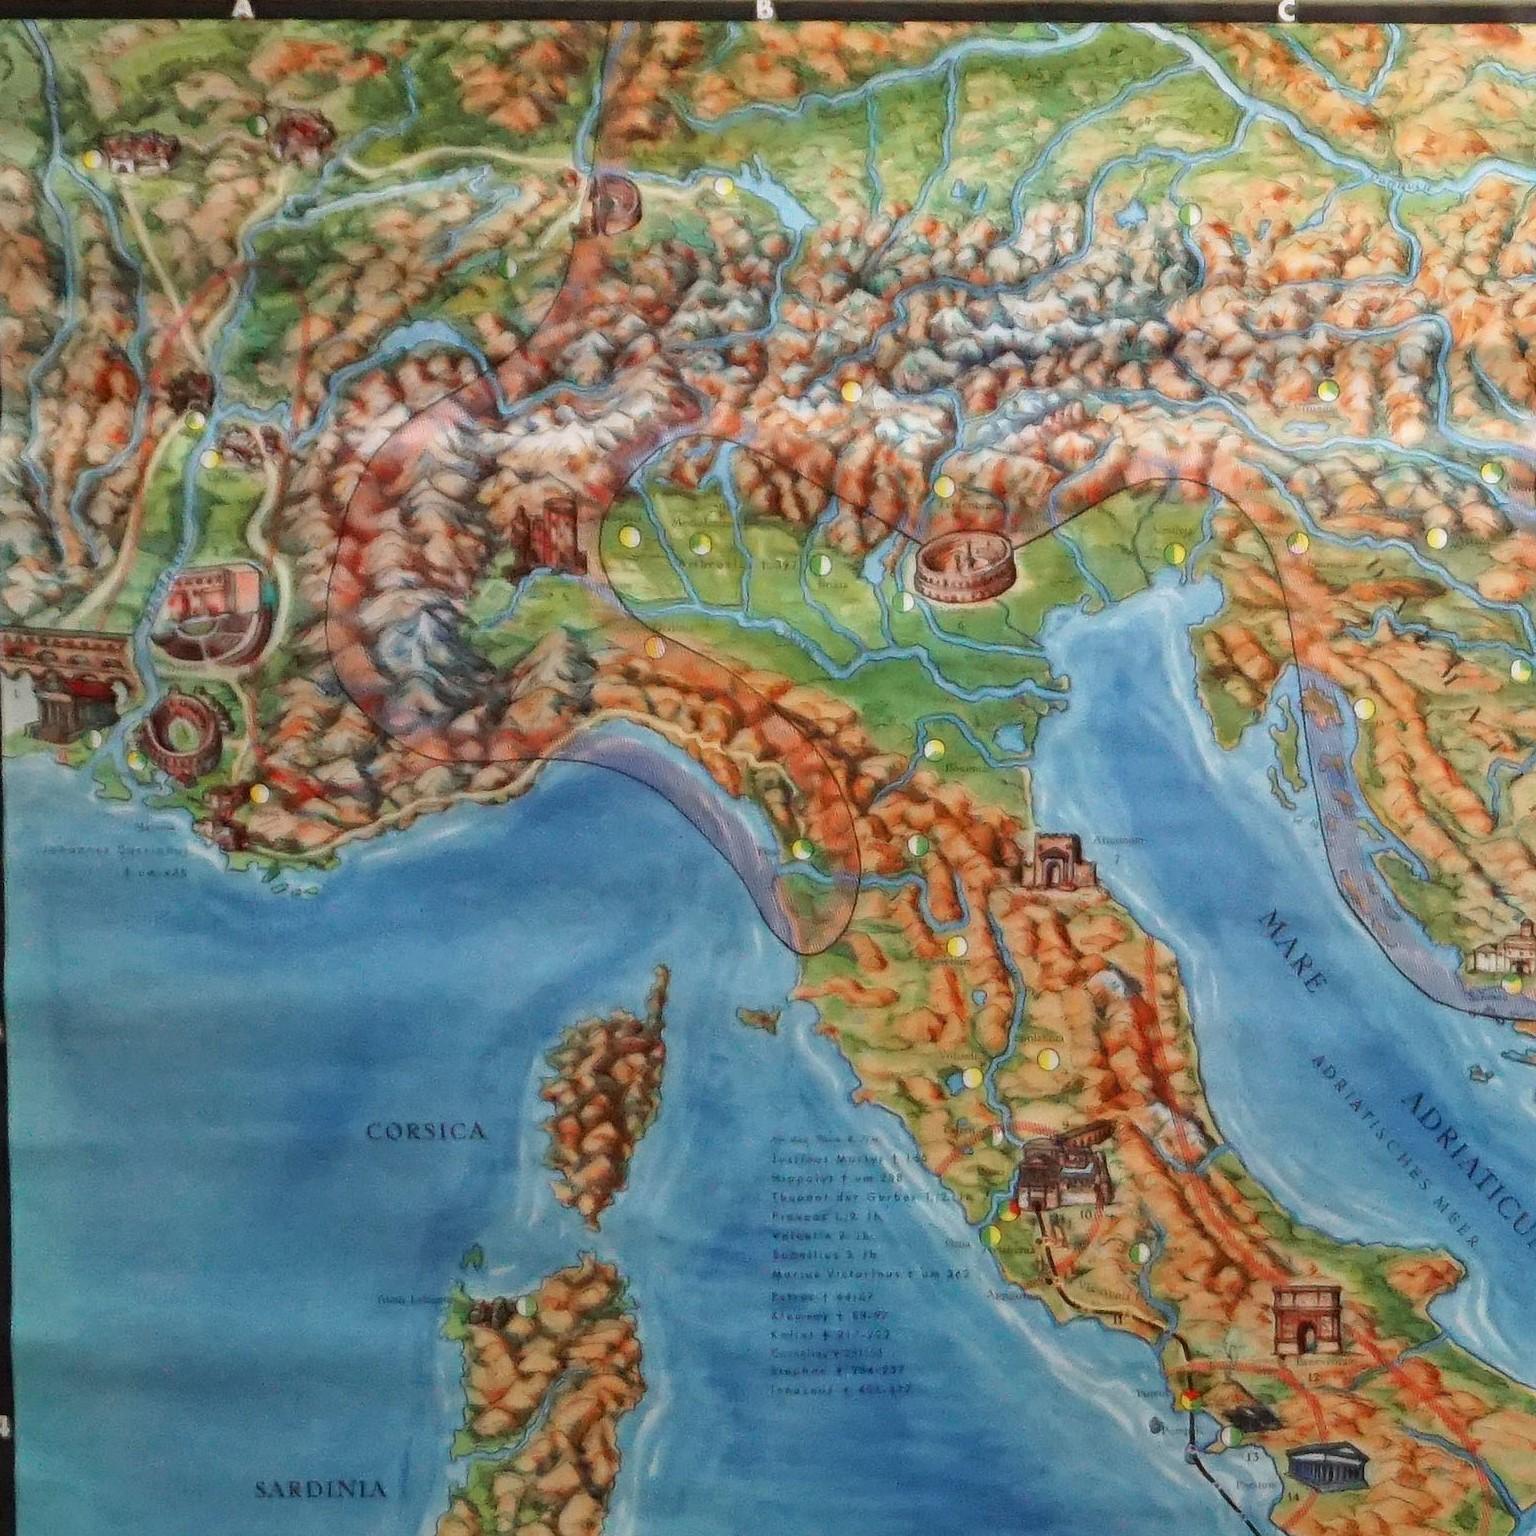 A colorful picturous map showing the journey of the apostle Paul, published by Becker´s Hamburg. Colorful print on paper reinforced with canvas.
Measurements:
Width 216,50 cm (85.24 inch)
Height 168 cm (66.14 inch)

The measurements shown refer just